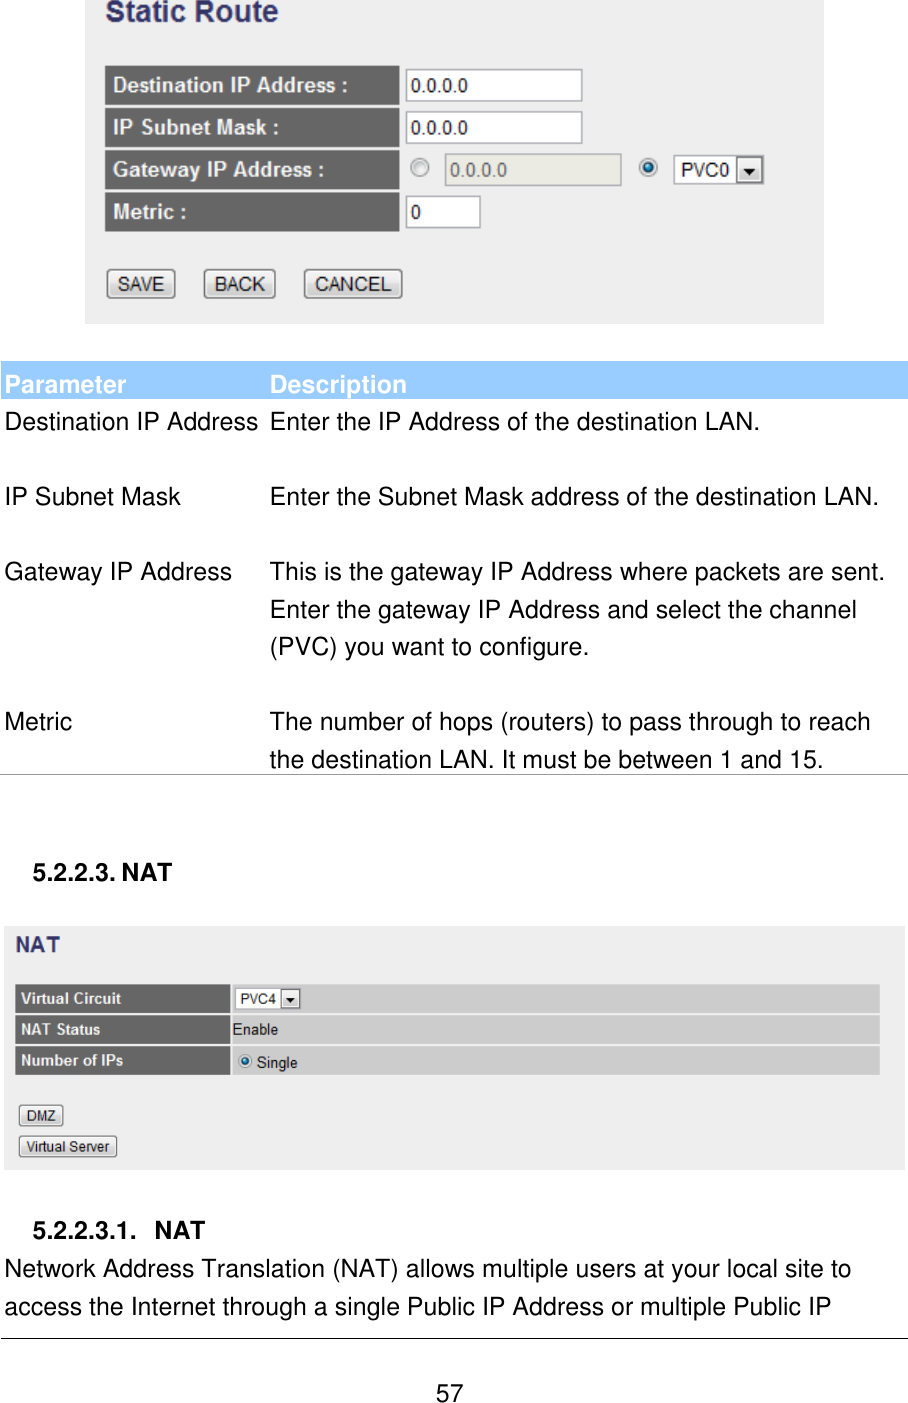   57   Parameter Description Destination IP Address  Enter the IP Address of the destination LAN.   IP Subnet Mask Enter the Subnet Mask address of the destination LAN.   Gateway IP Address This is the gateway IP Address where packets are sent. Enter the gateway IP Address and select the channel (PVC) you want to configure.   Metric The number of hops (routers) to pass through to reach the destination LAN. It must be between 1 and 15.   5.2.2.3. NAT    5.2.2.3.1.  NAT Network Address Translation (NAT) allows multiple users at your local site to access the Internet through a single Public IP Address or multiple Public IP 